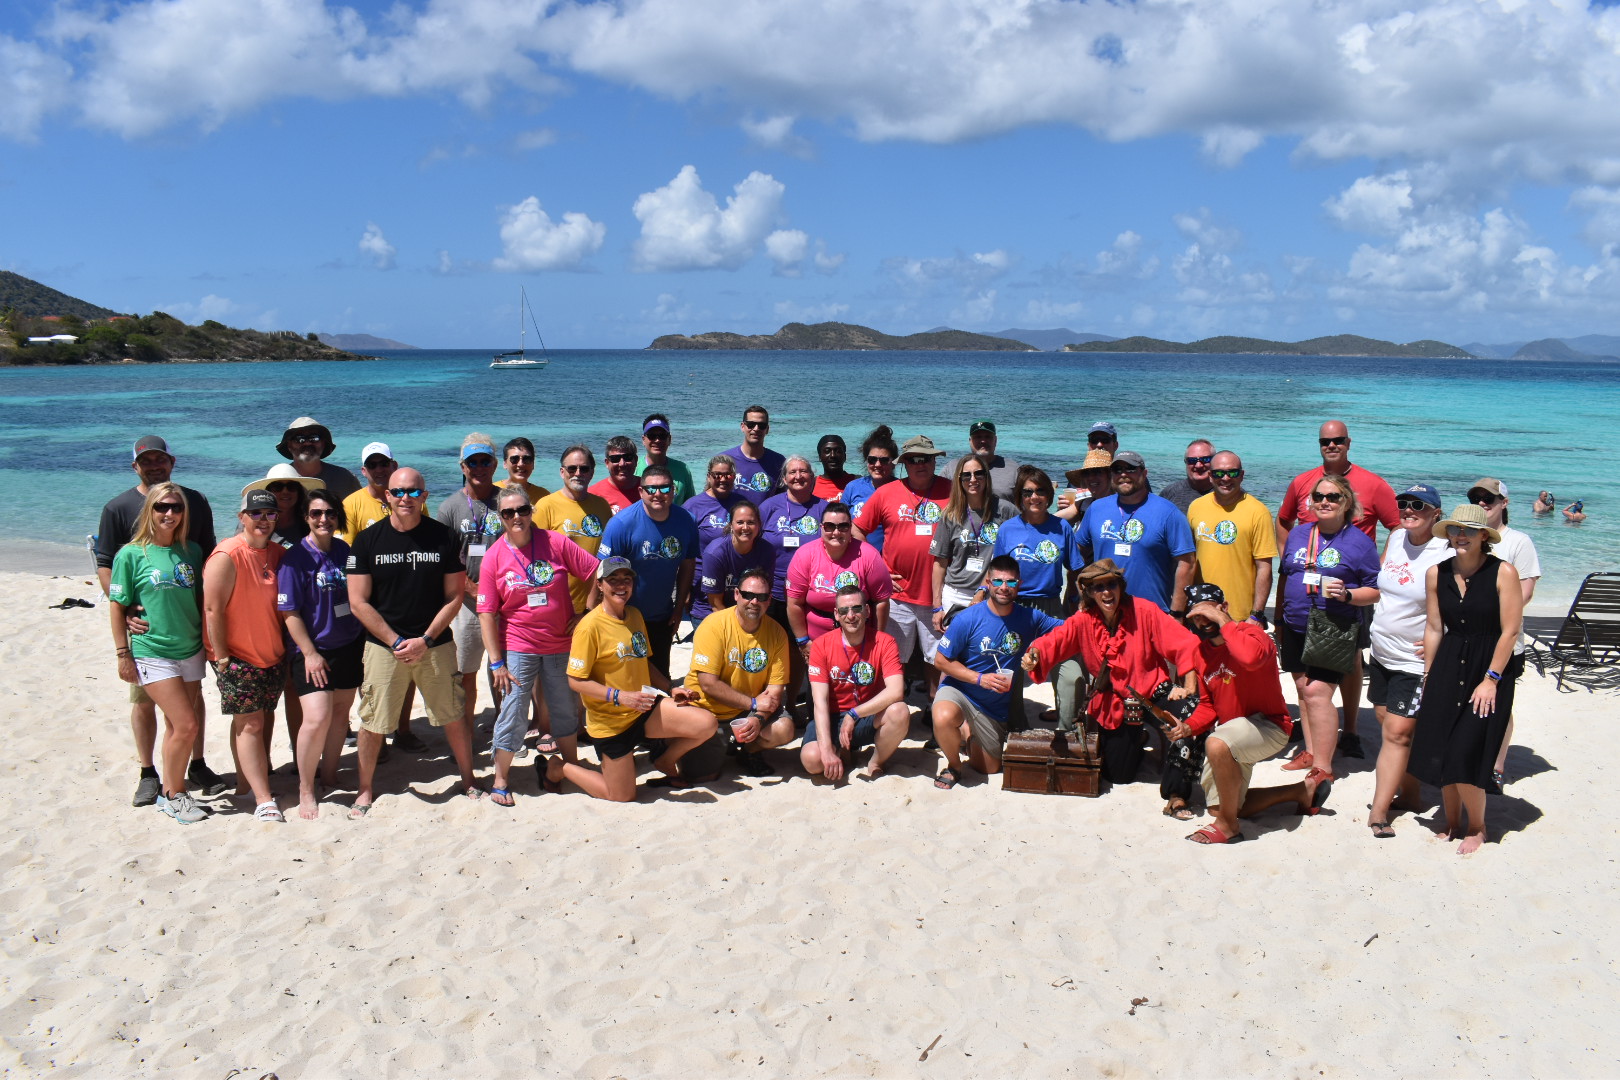 A group of about 60 people in different colored shirts pose on a beach. There is a treasure chest and a woman dressed as a pirate in the middle of their group.